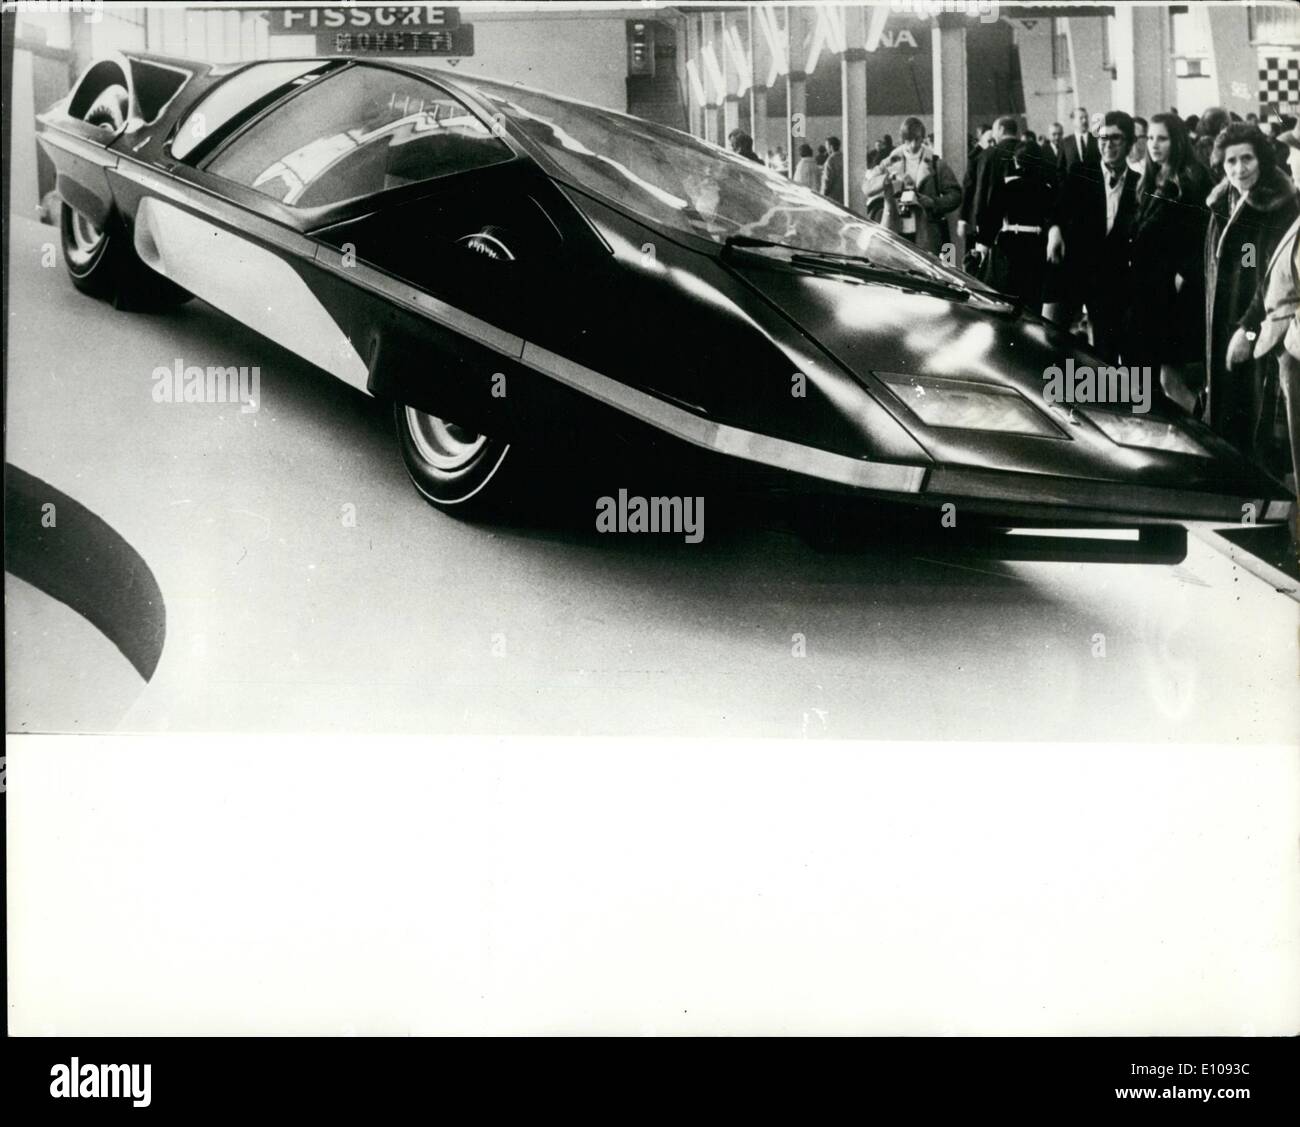 Mar. 03, 1970 - Opening Of The Geneva Motor Show Science-Fiction Look: There's a science fiction look about this latest body from the workshop of the famous Italian designer Pinin Farina - seen at the opening of the Geneva Motor Show. Stock Photo